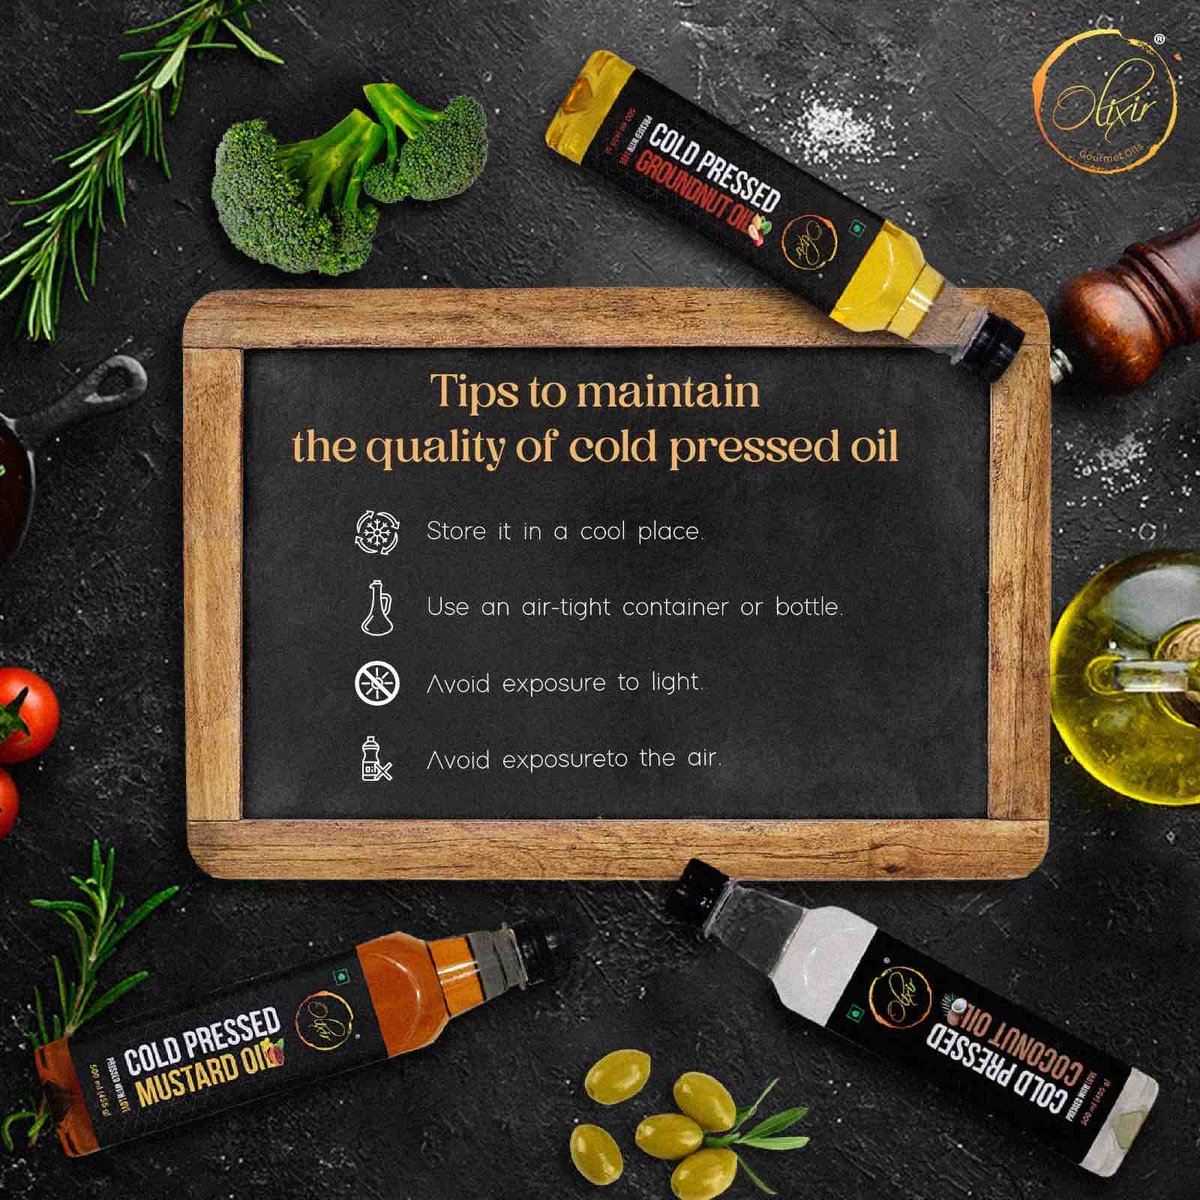 Kitchen Tip: Even though cold-pressed oils are pretty stable at room temperature, they can tend to get perished as these oils are free of chemical solvents.

#olixiroils #coldpressedoils #storagetips #groundnutoil #kachighani #healthyoil #healthylifestyle #kitchentips